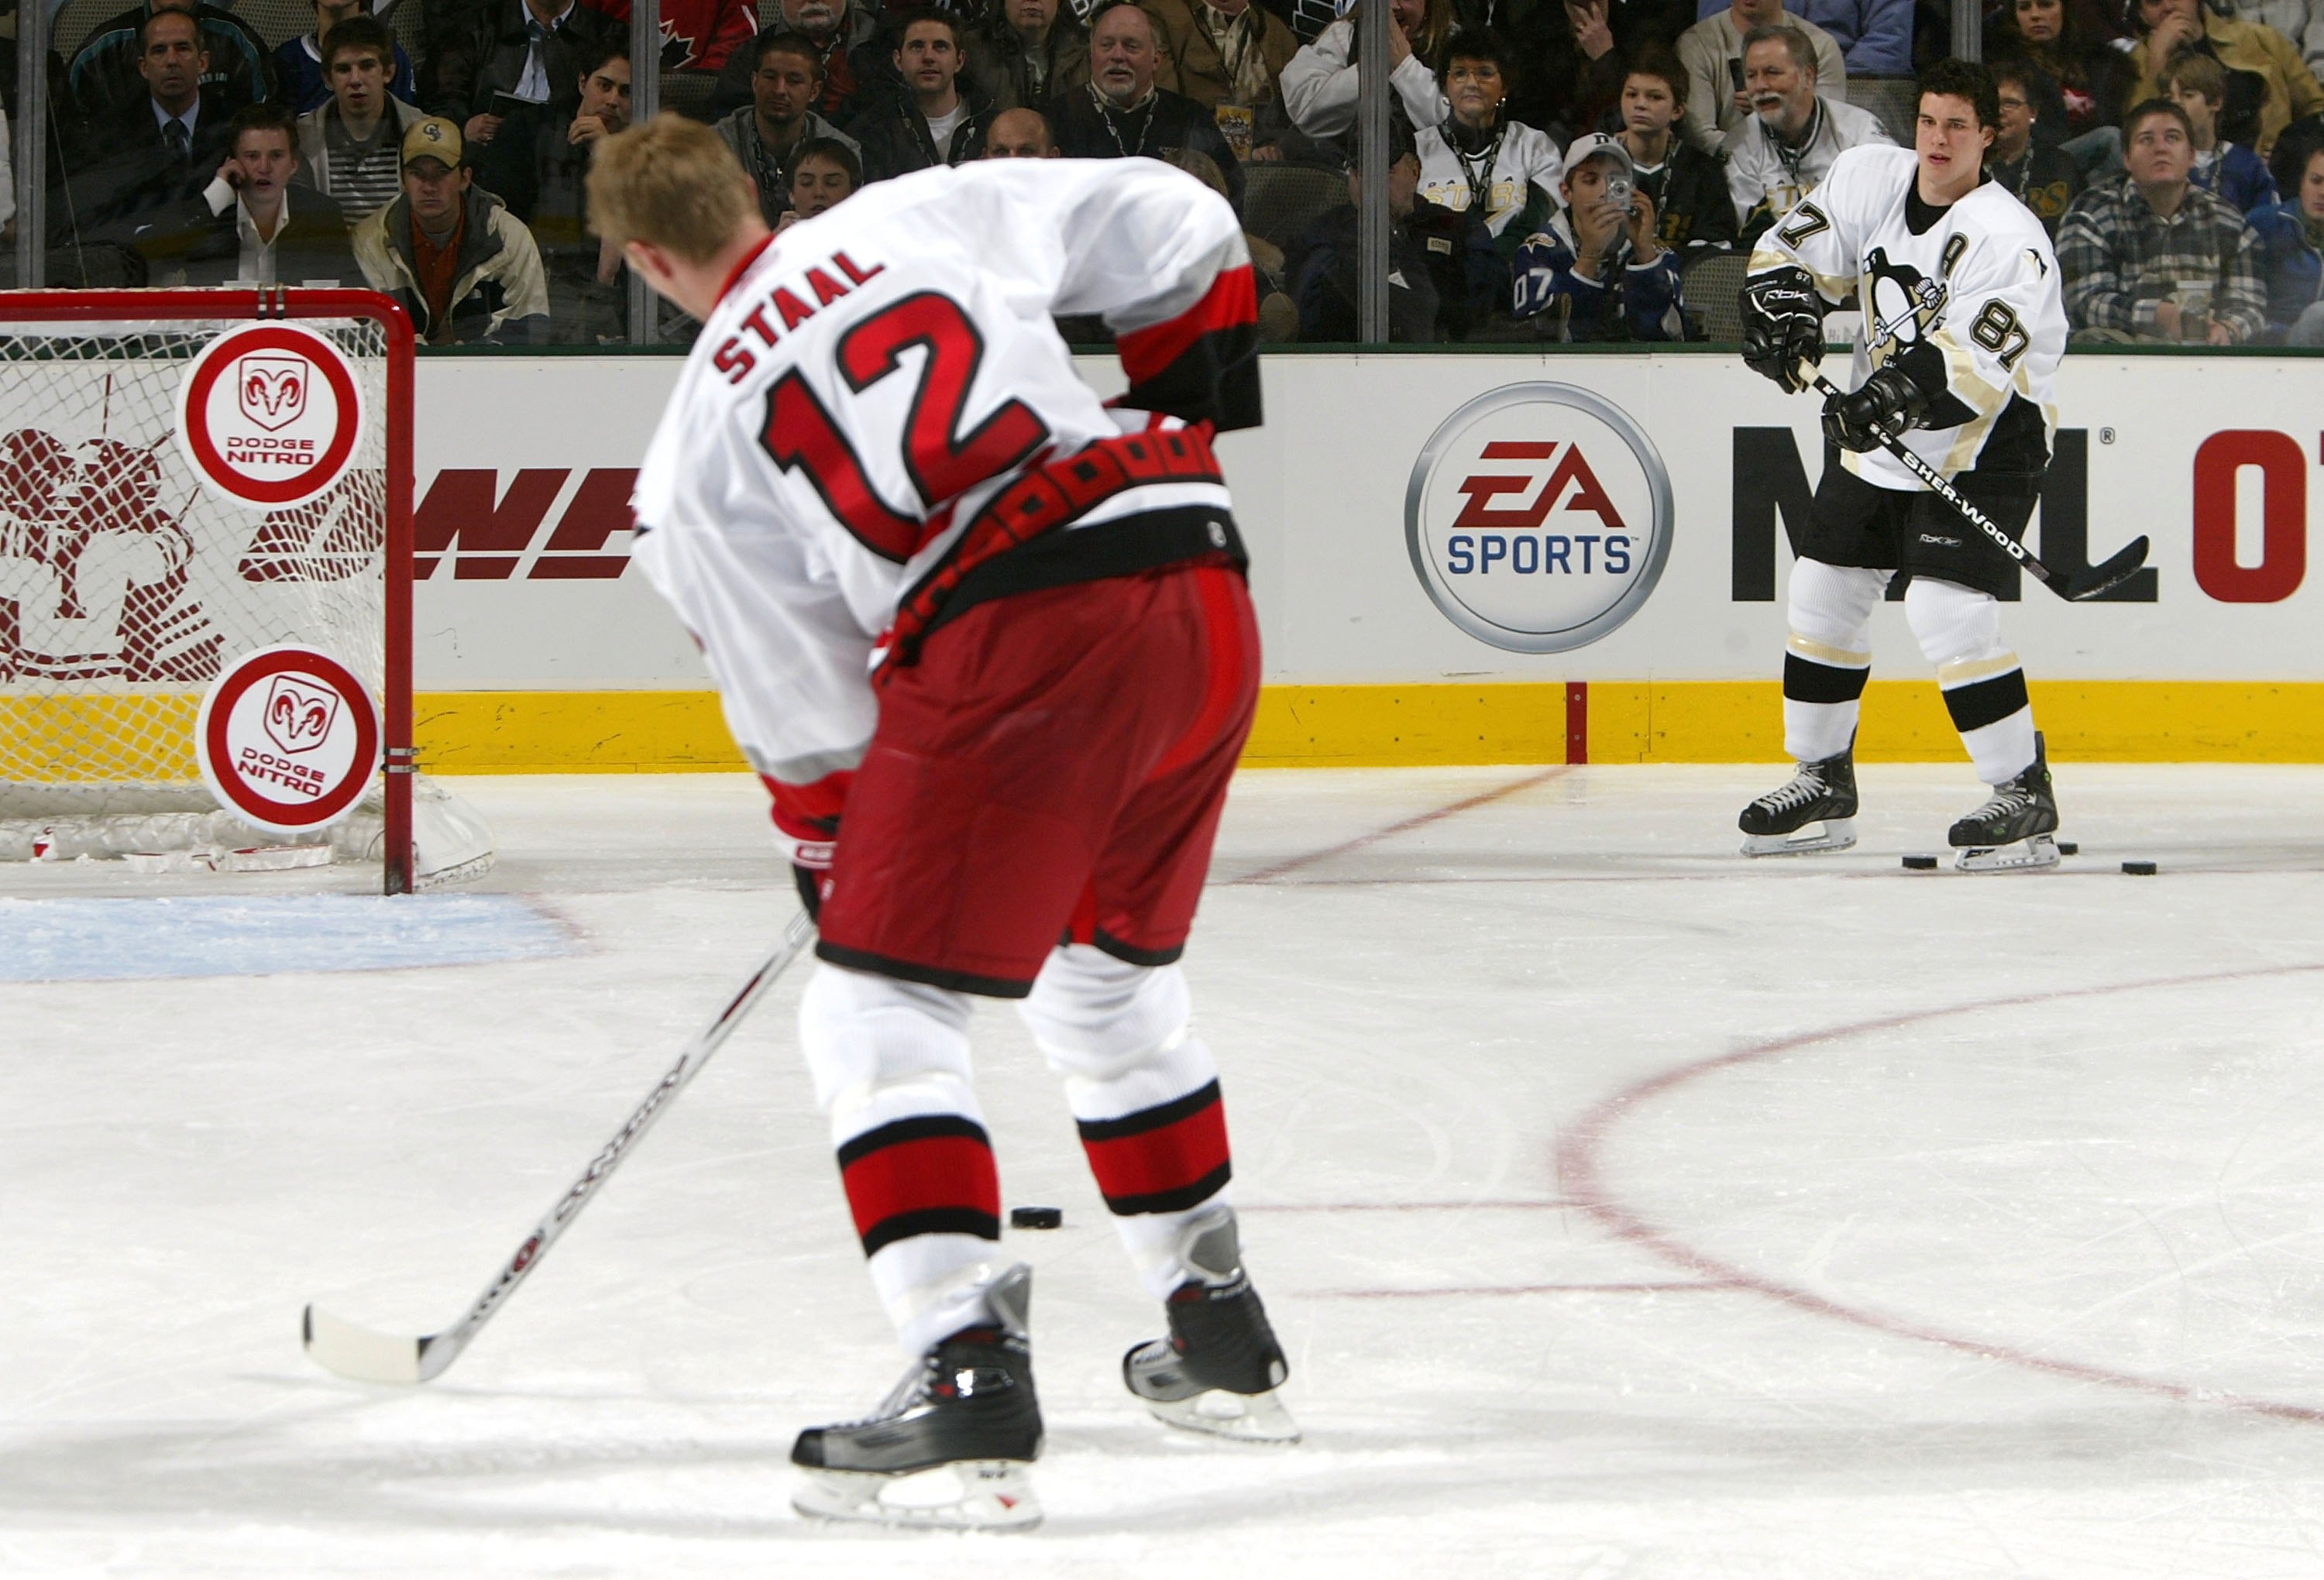 DALLAS - JANUARY 23:  Eastern Conference All-Star Sidney Crosby #87 of the Pittsburgh Penguins passes the puck to Eric Staal #12 of the Carolina Hurricanes in the 'Shooting Accuracy' during the 2007 NHL All-Star Skills Gameon January 23, 2007 at the Ameri